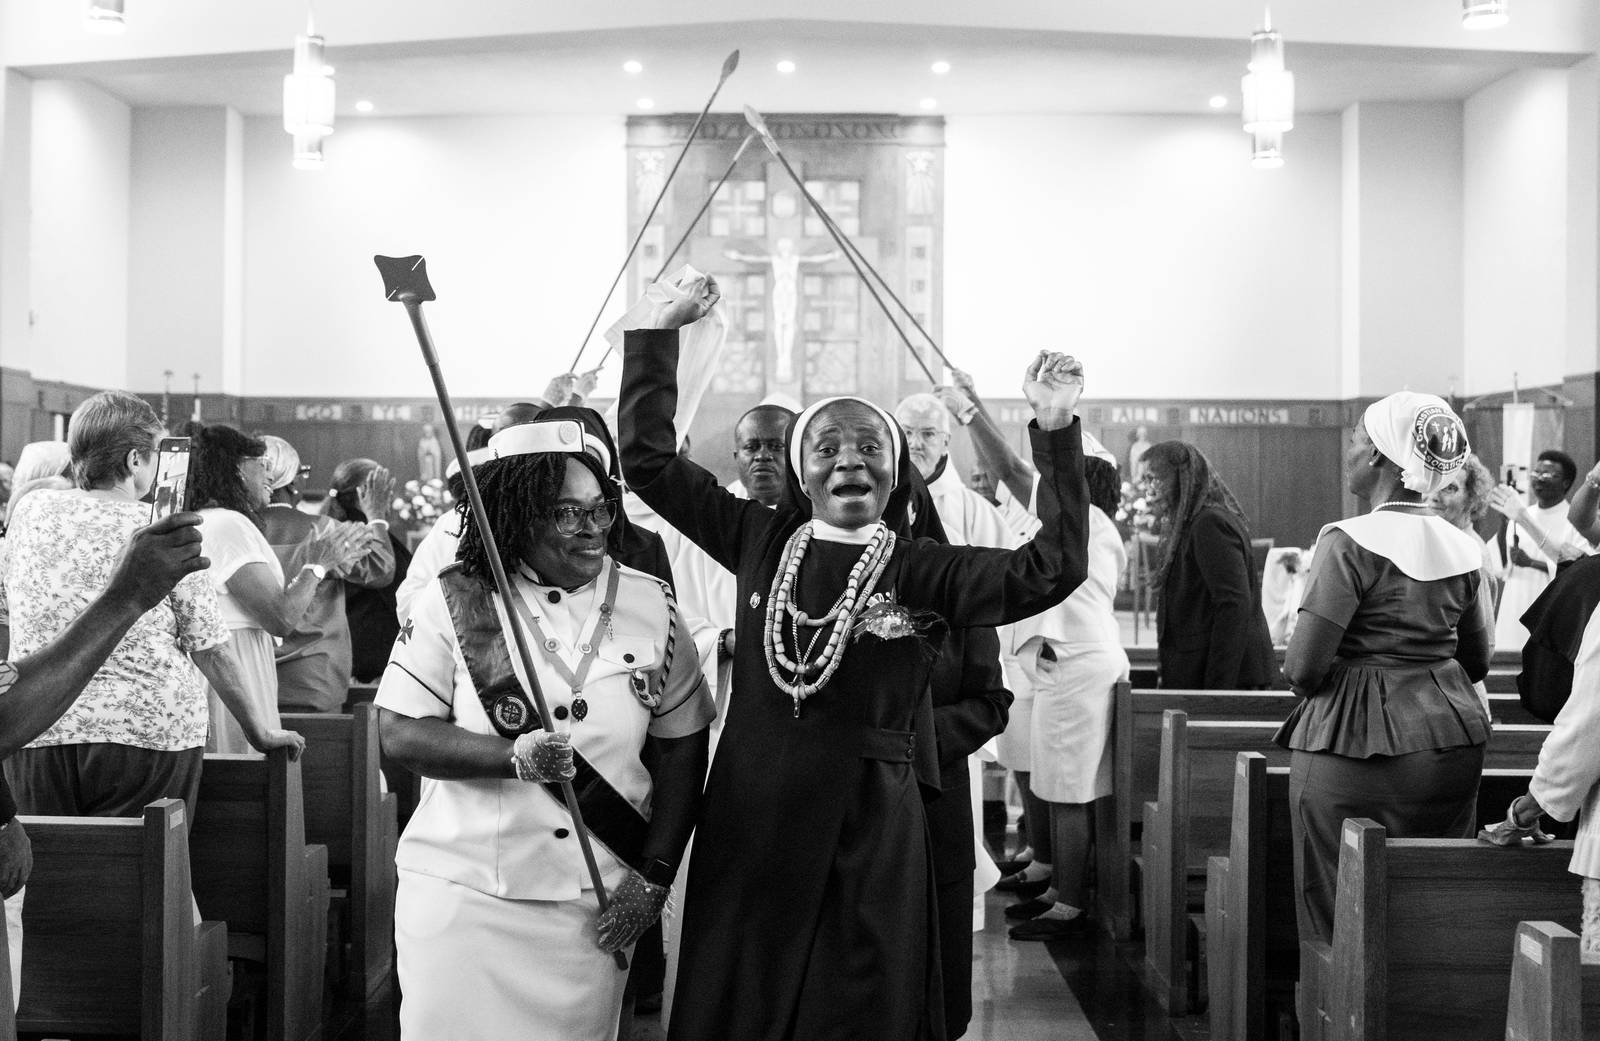 Sister Mary Pauline Tamakloe celebrates down the aisle after taking her final profession at Our Lady of Mount Providence Convent, in Arbutus, Monday, August 14, 2023.